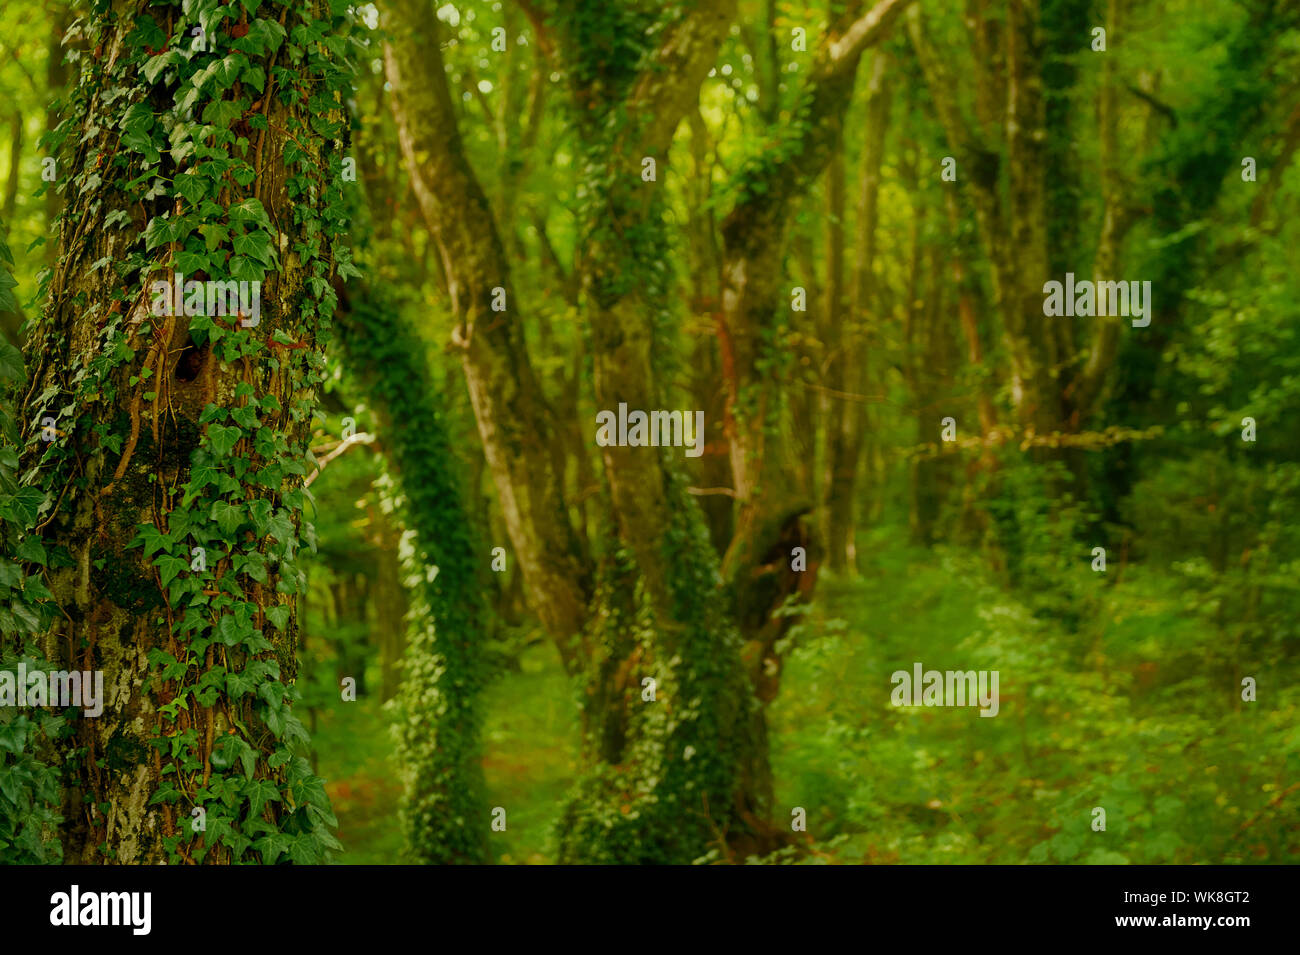 Deciduous forest and trees overgrown with ivy Stock Photo